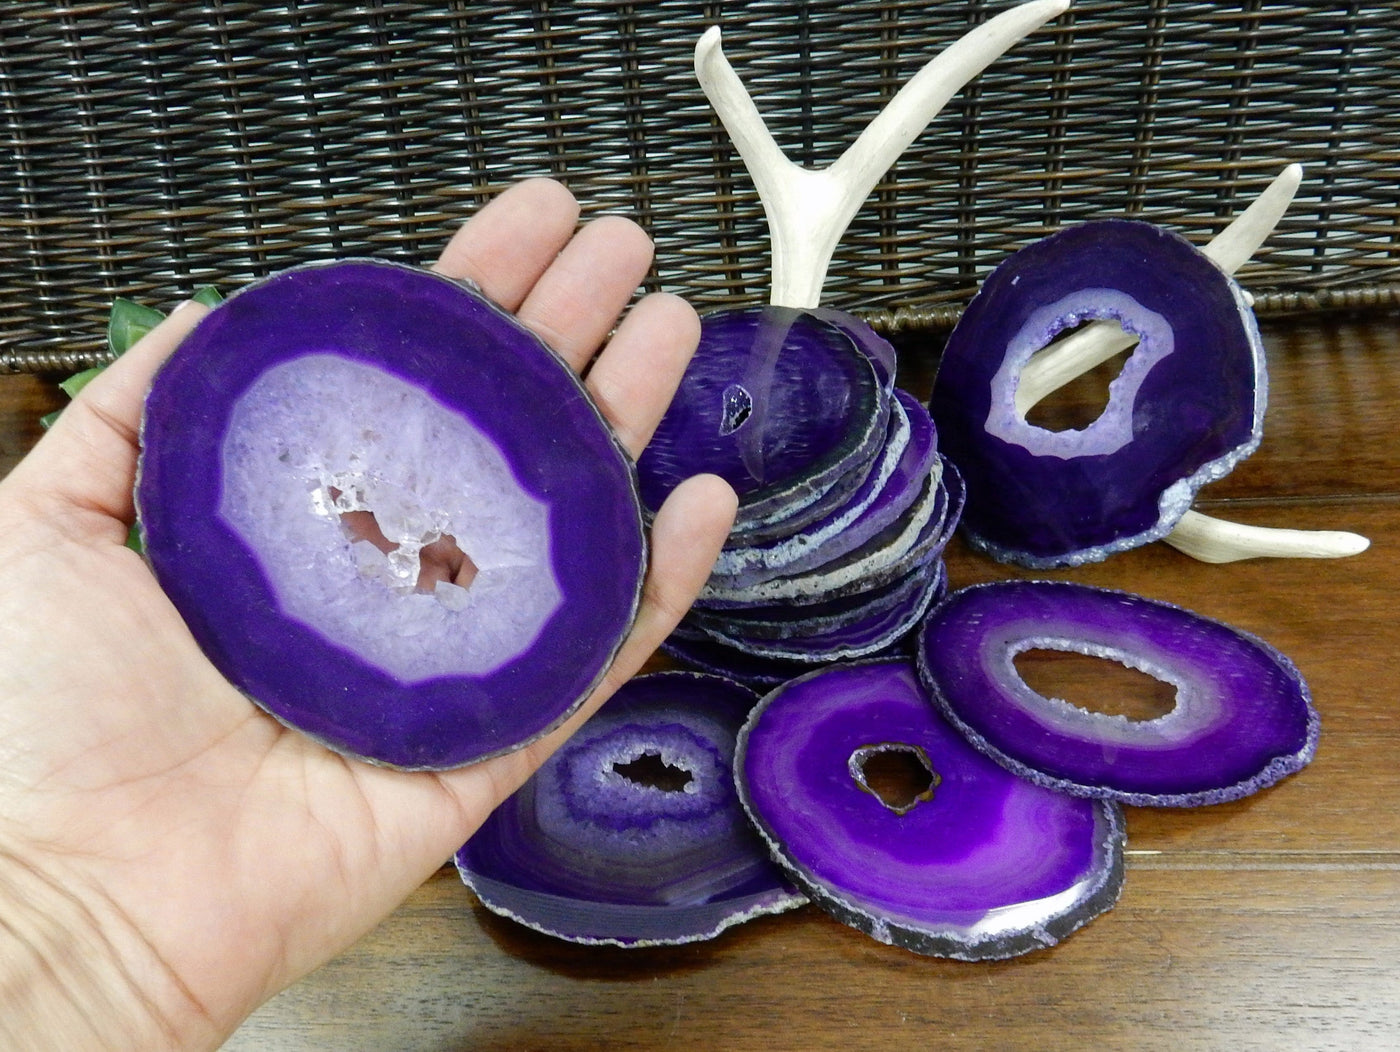 Hand holding A druzy purple agate slice for size reference while other druzy agates are displayed the background  